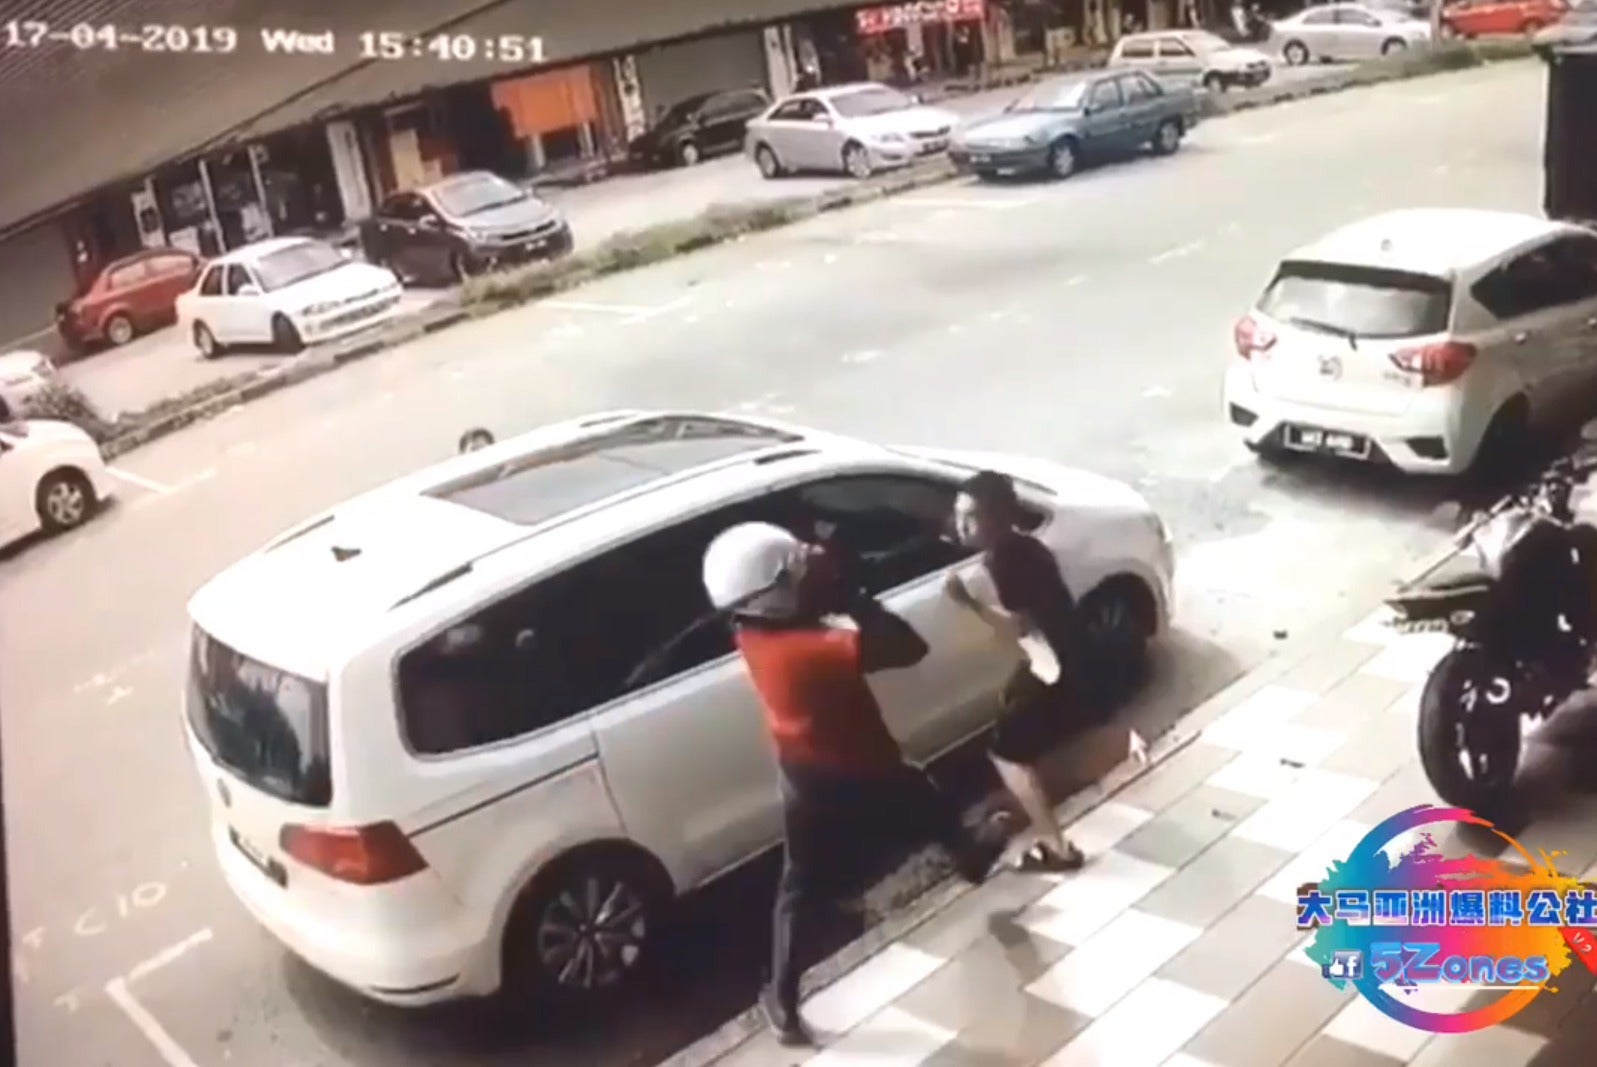 M'sian Man Attacked by Stranger Wielding Parang, Barely Escapes Thanks to Brave Wife Who Protected Him - WORLD OF BUZZ